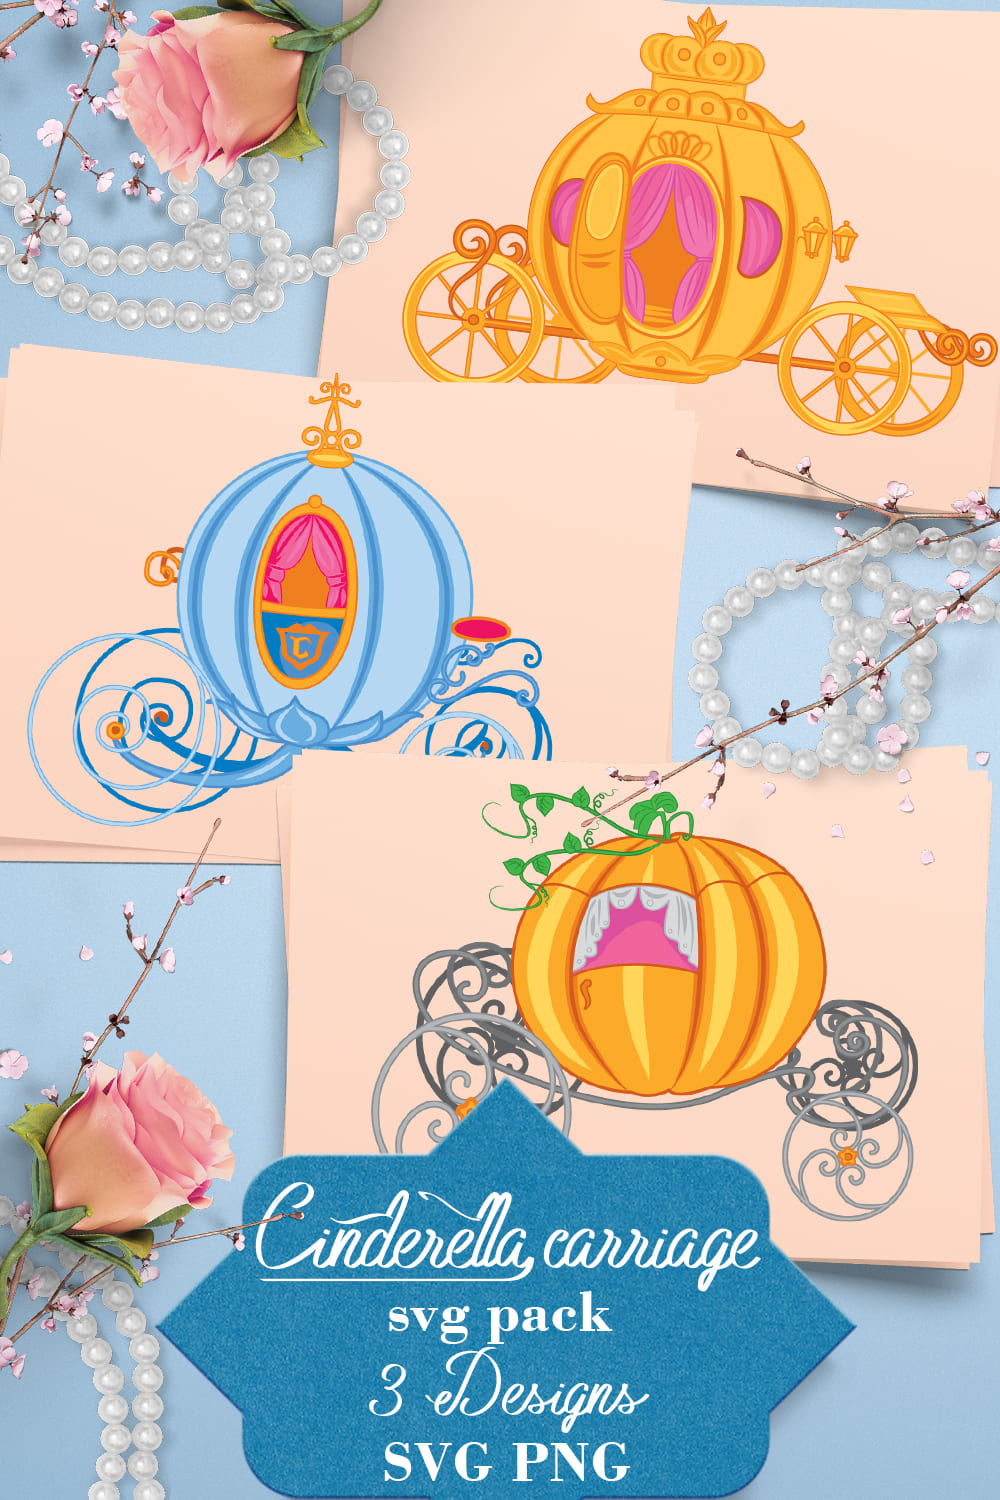 Creative and colorful cinderella carriages.